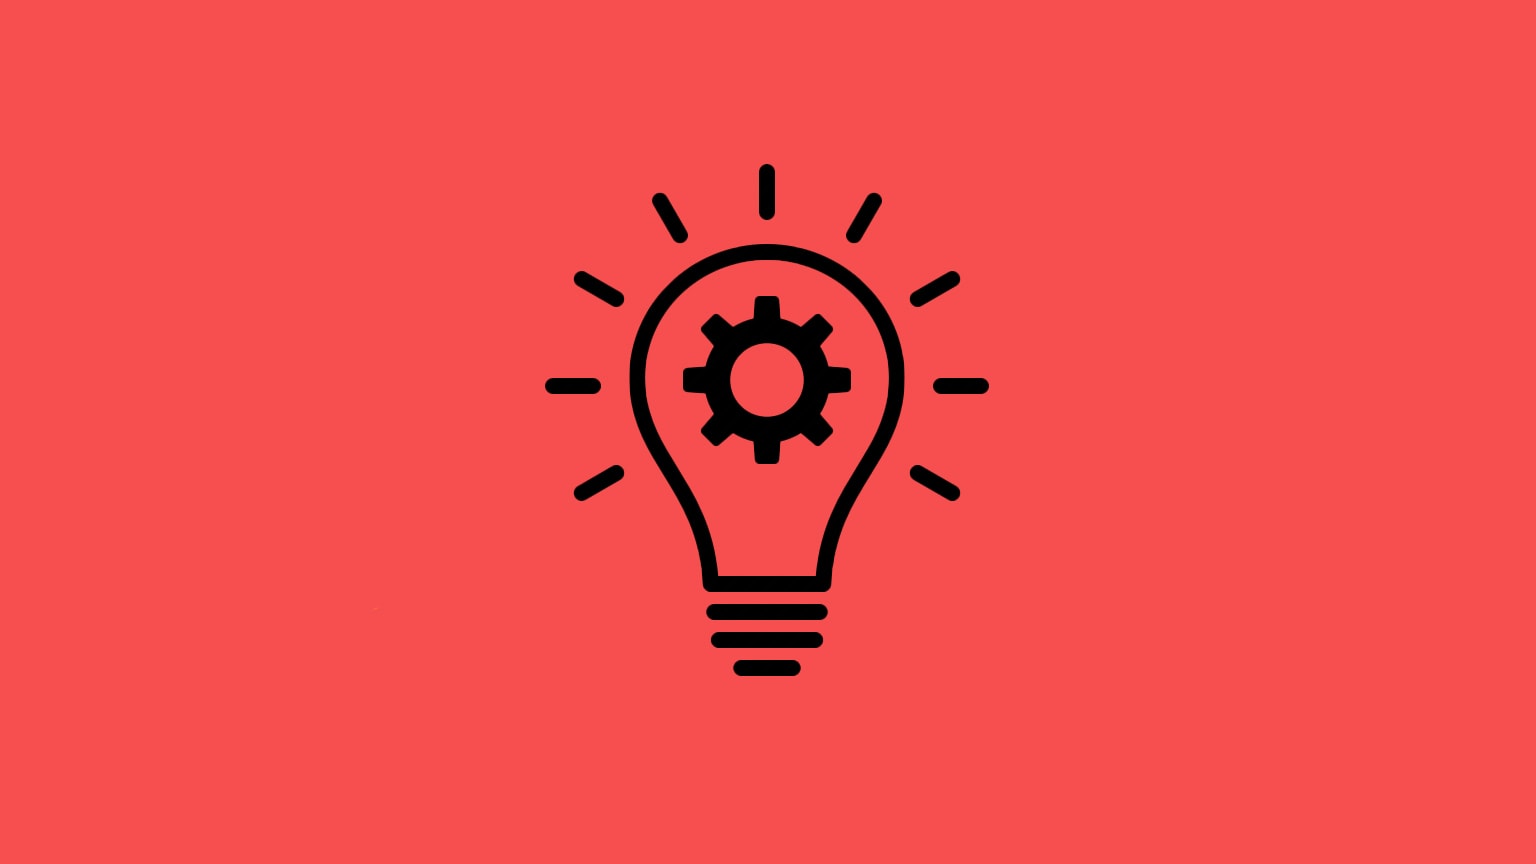 Lightbulb and cog icon, representing the ideation stage of the design thinking process